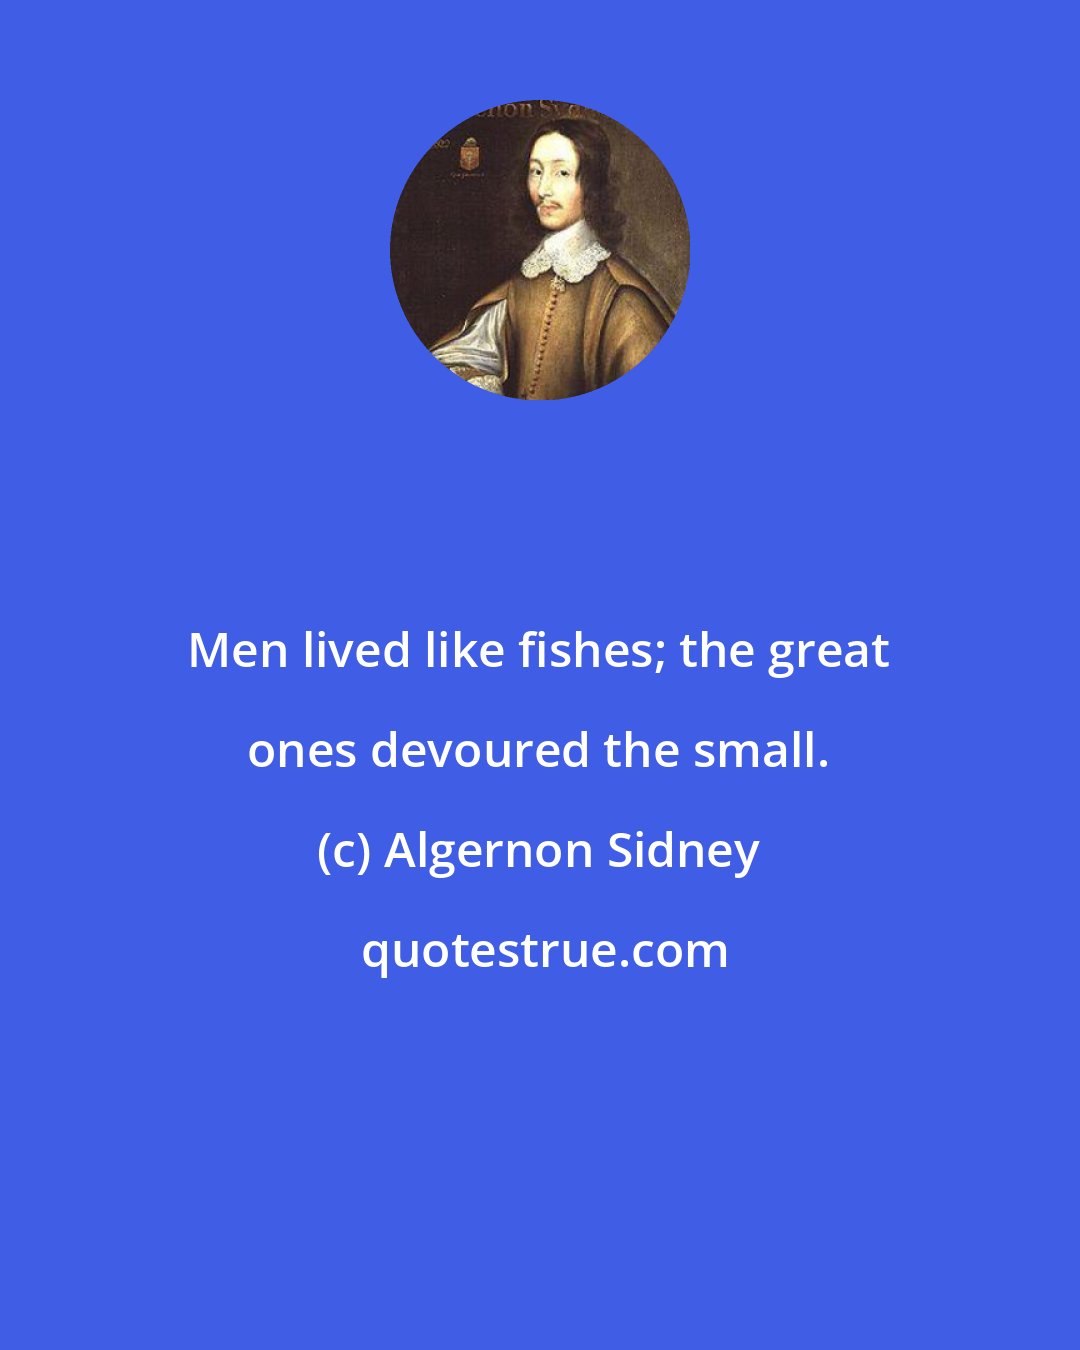 Algernon Sidney: Men lived like fishes; the great ones devoured the small.